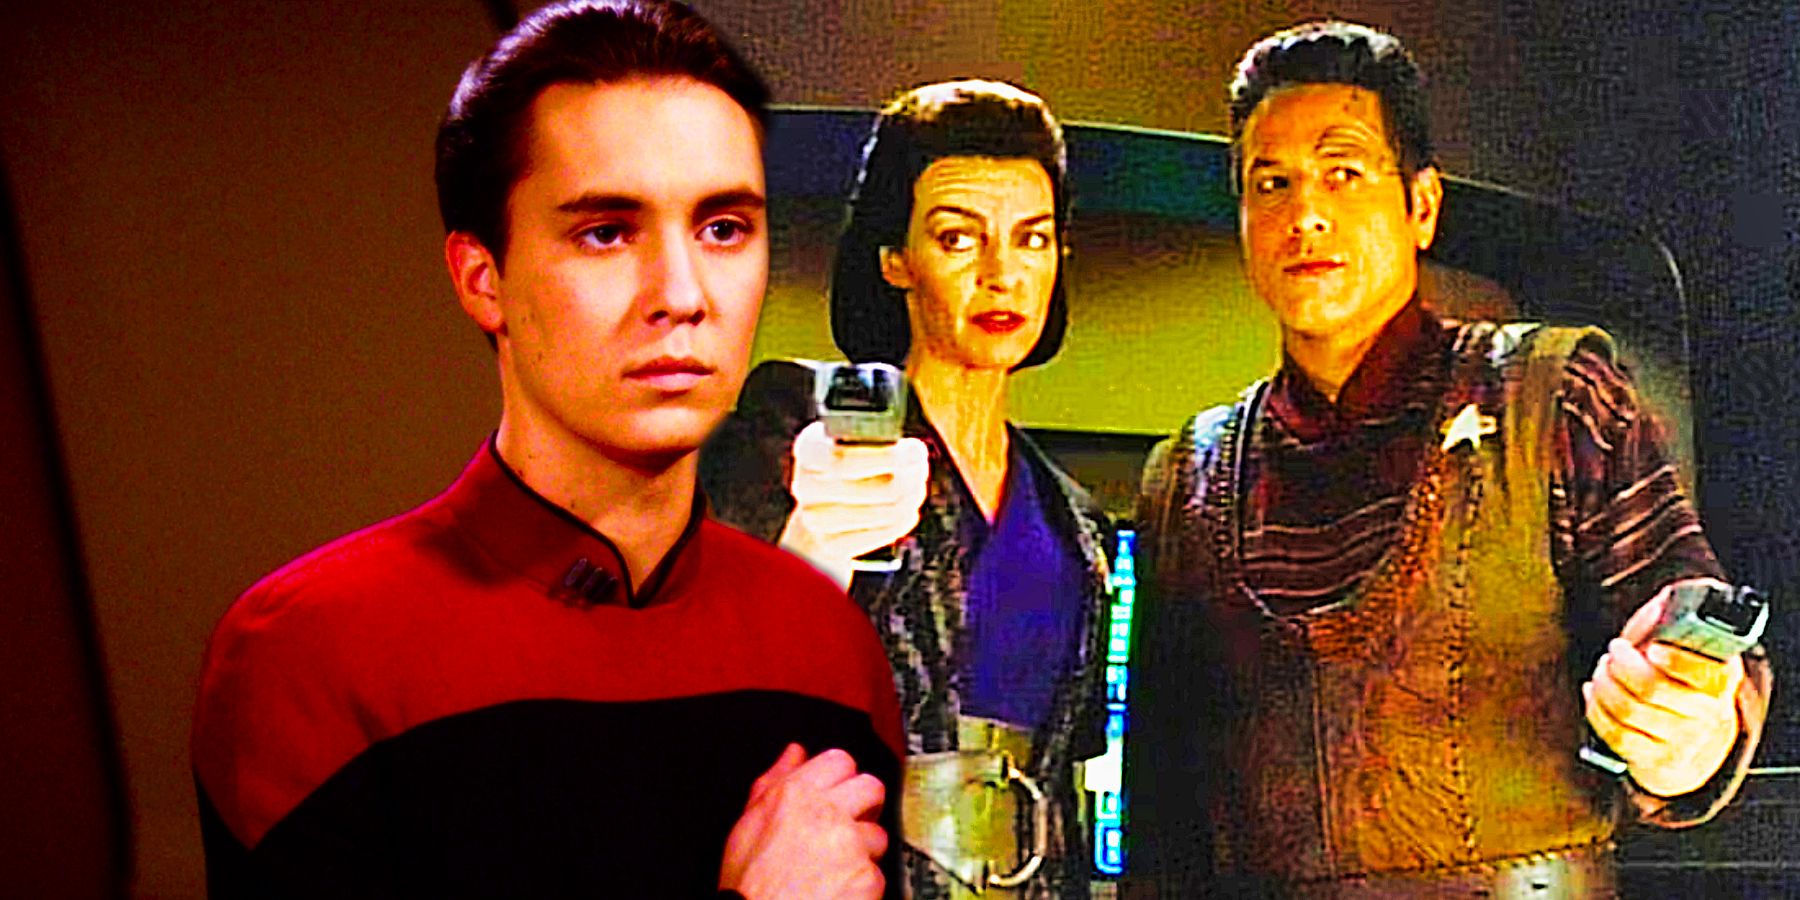 Wesley Crusher removes his Starfleet badge, while Maquis members Seska and Chakotay point phasers